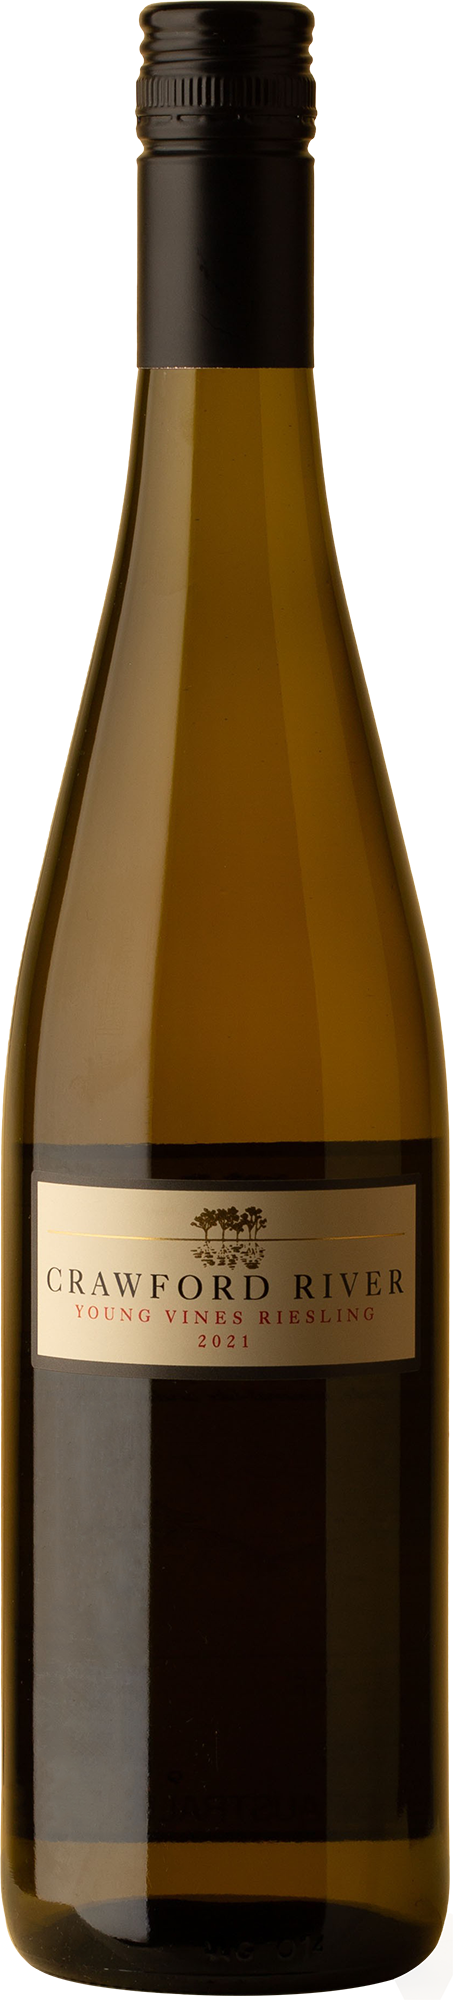 Crawford River - Young Vines Riesling 2021 White Wine